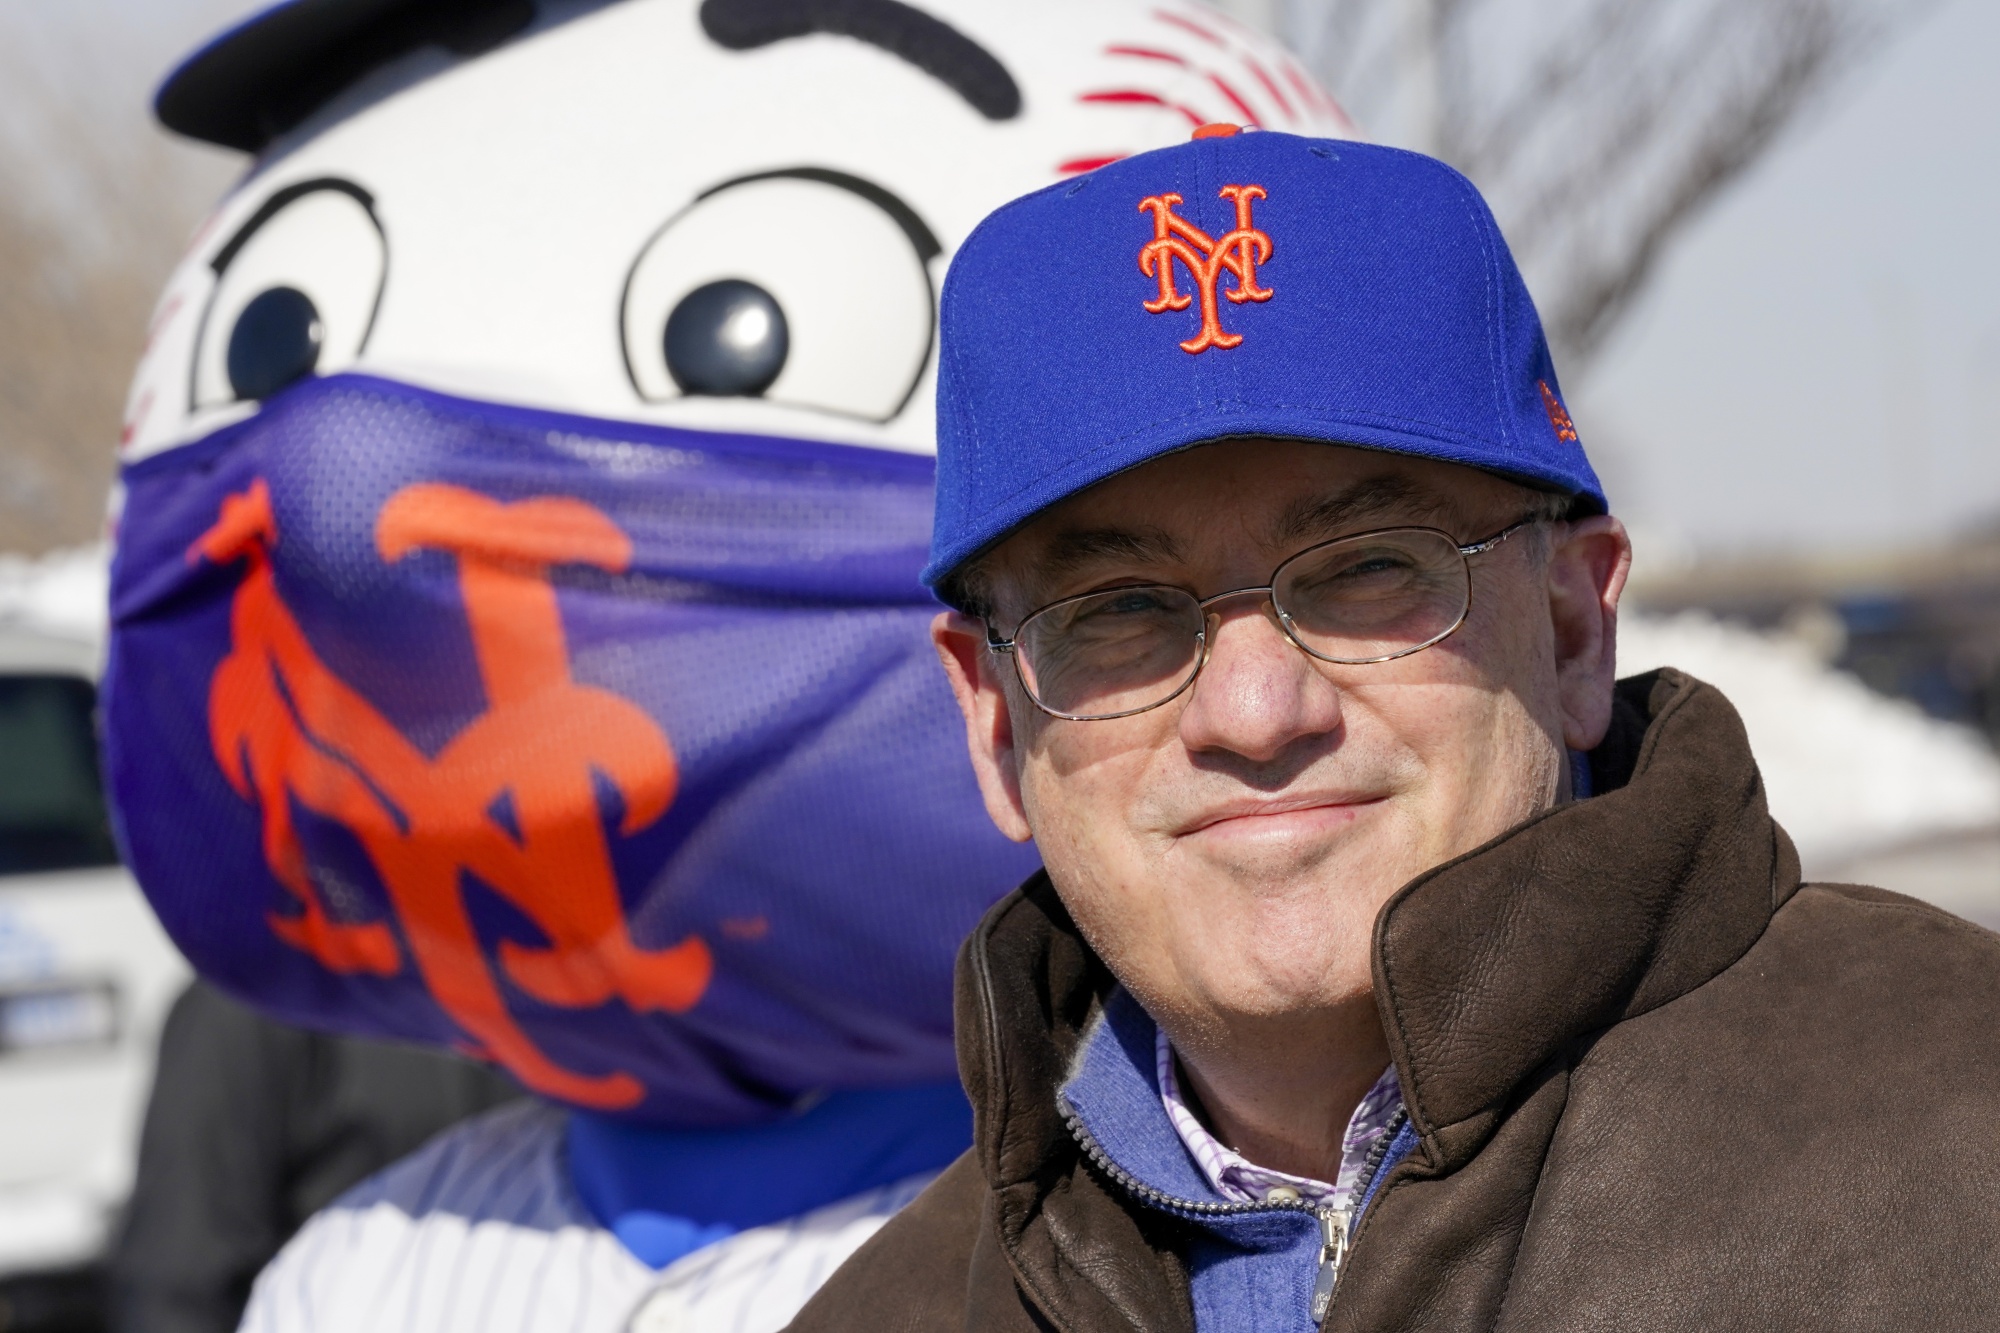 Facebook Data Shows Even in Queens, Yankees Are Favored over Mets